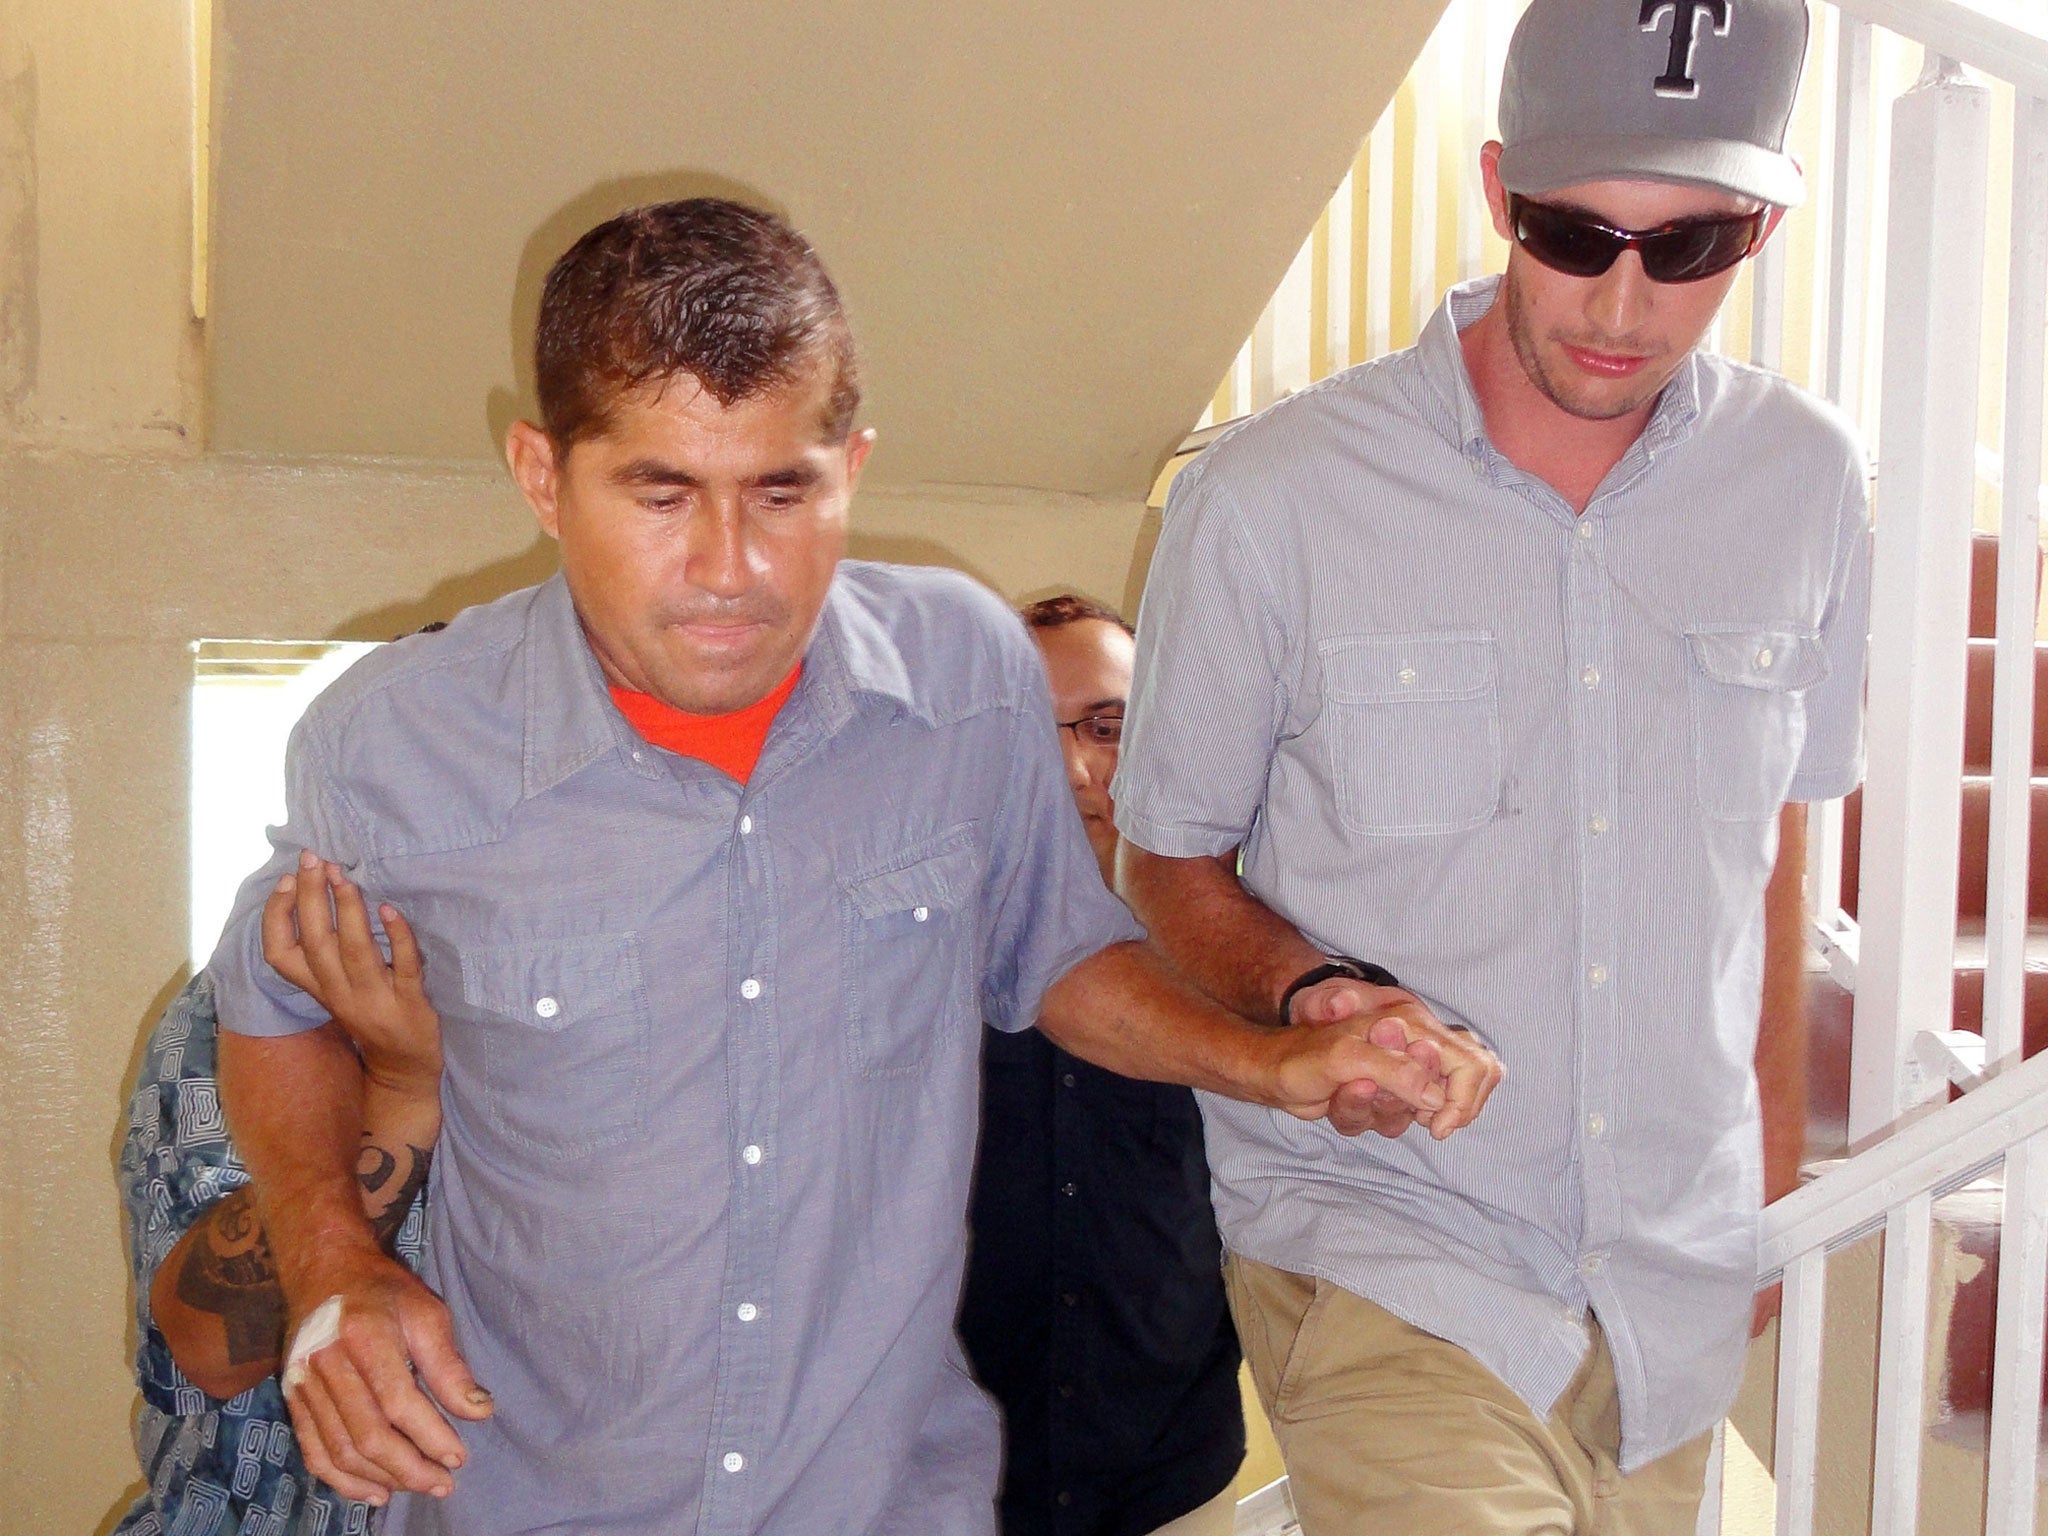 Pacific castaway Jose Salvador Alvarenga (L) is helped into a press conference in the Marshall Islands capital of Majuro on 6 February, 2014.